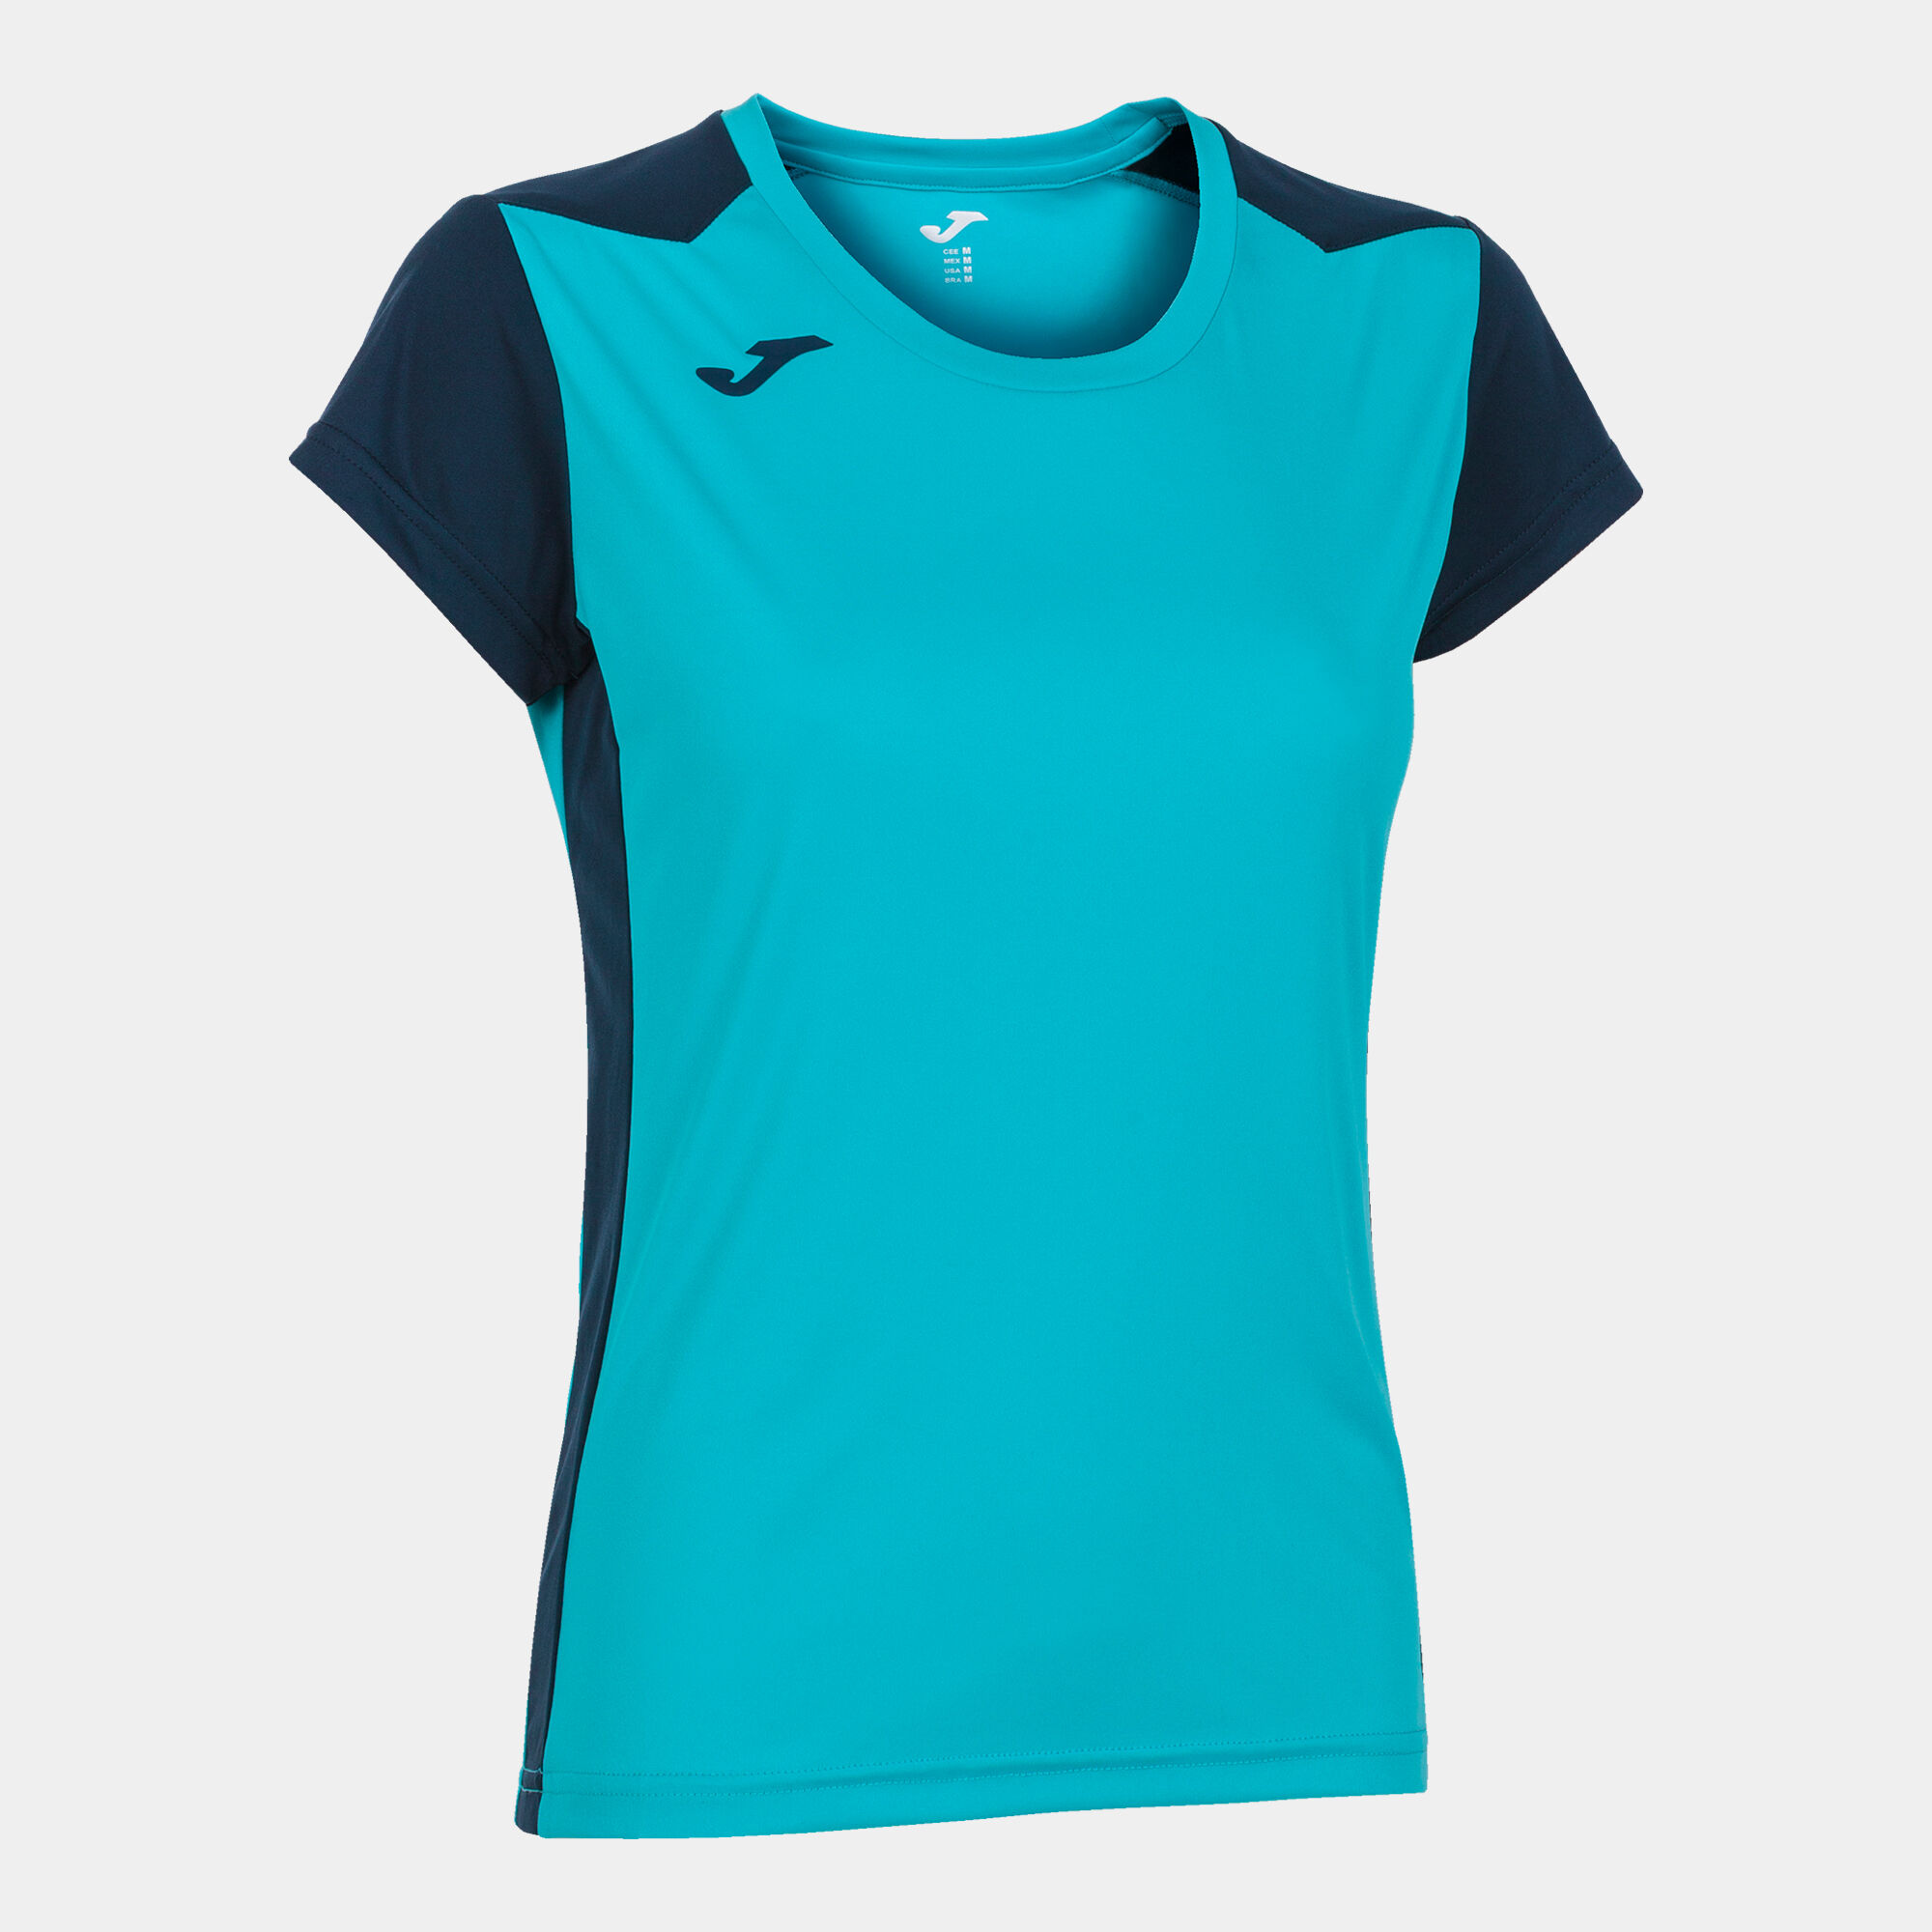 MAILLOT MANCHES COURTES FEMME RECORD II TURQUOISE FLUO BLEU MARINE